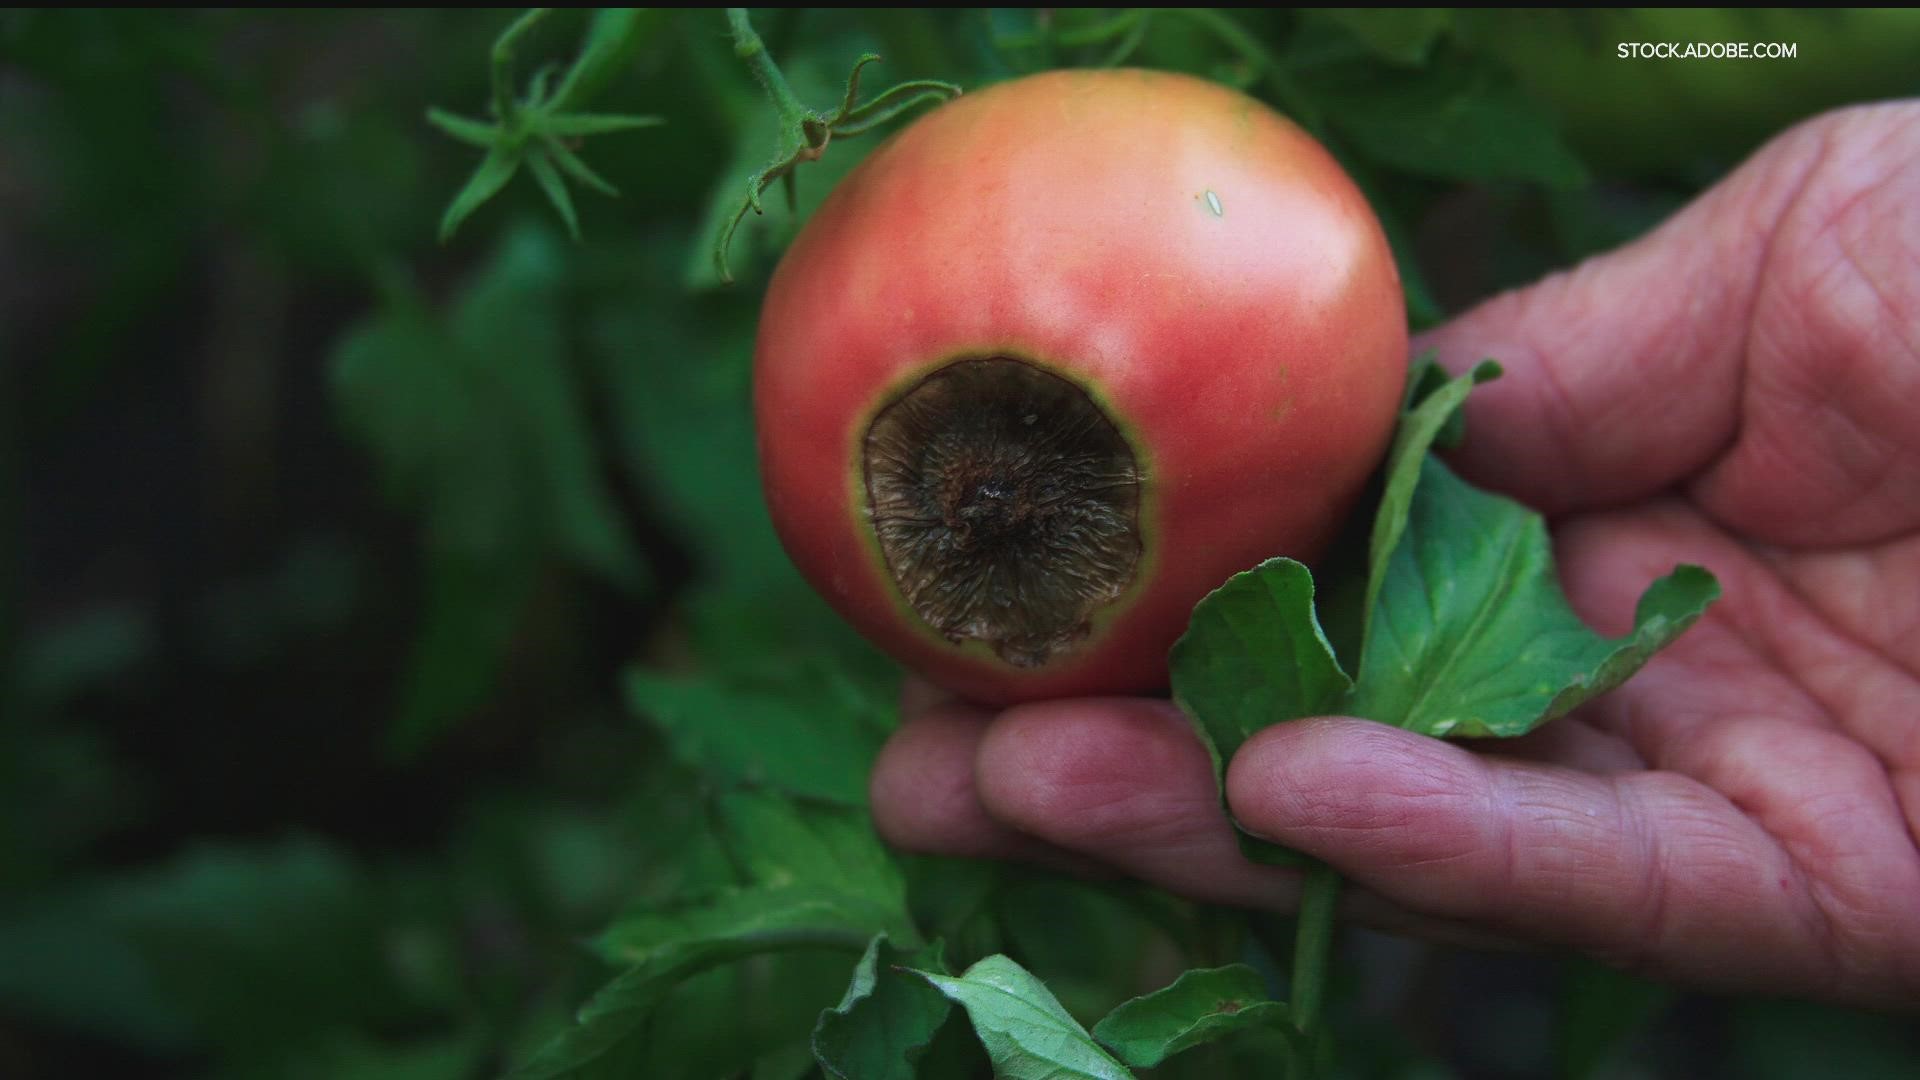 Bobby and Laura explain blossom end rot: What it is and what to do about it.